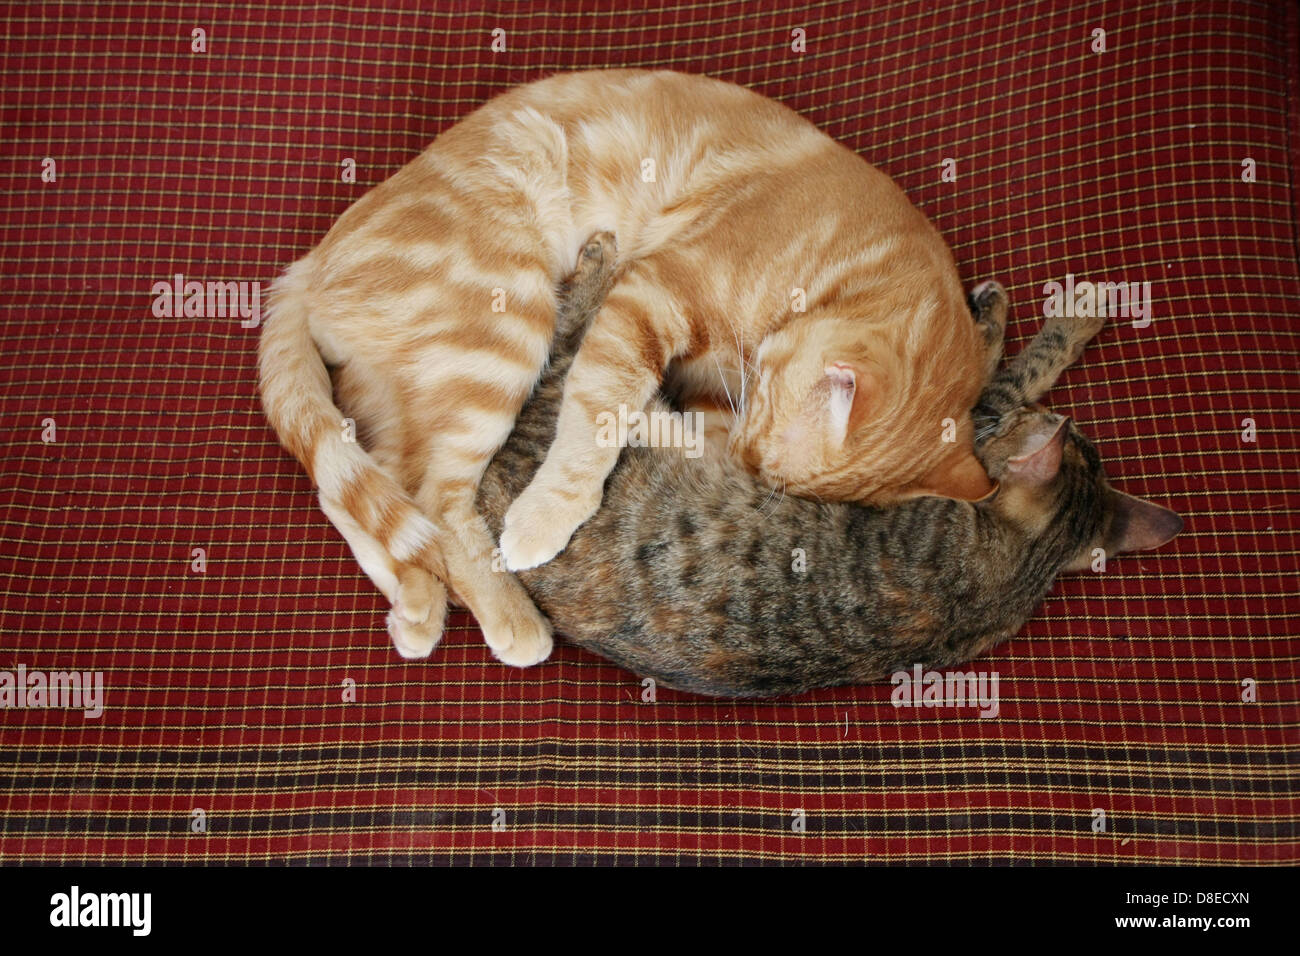 Two cats are sleeping curled up on bedding. Stock Photo